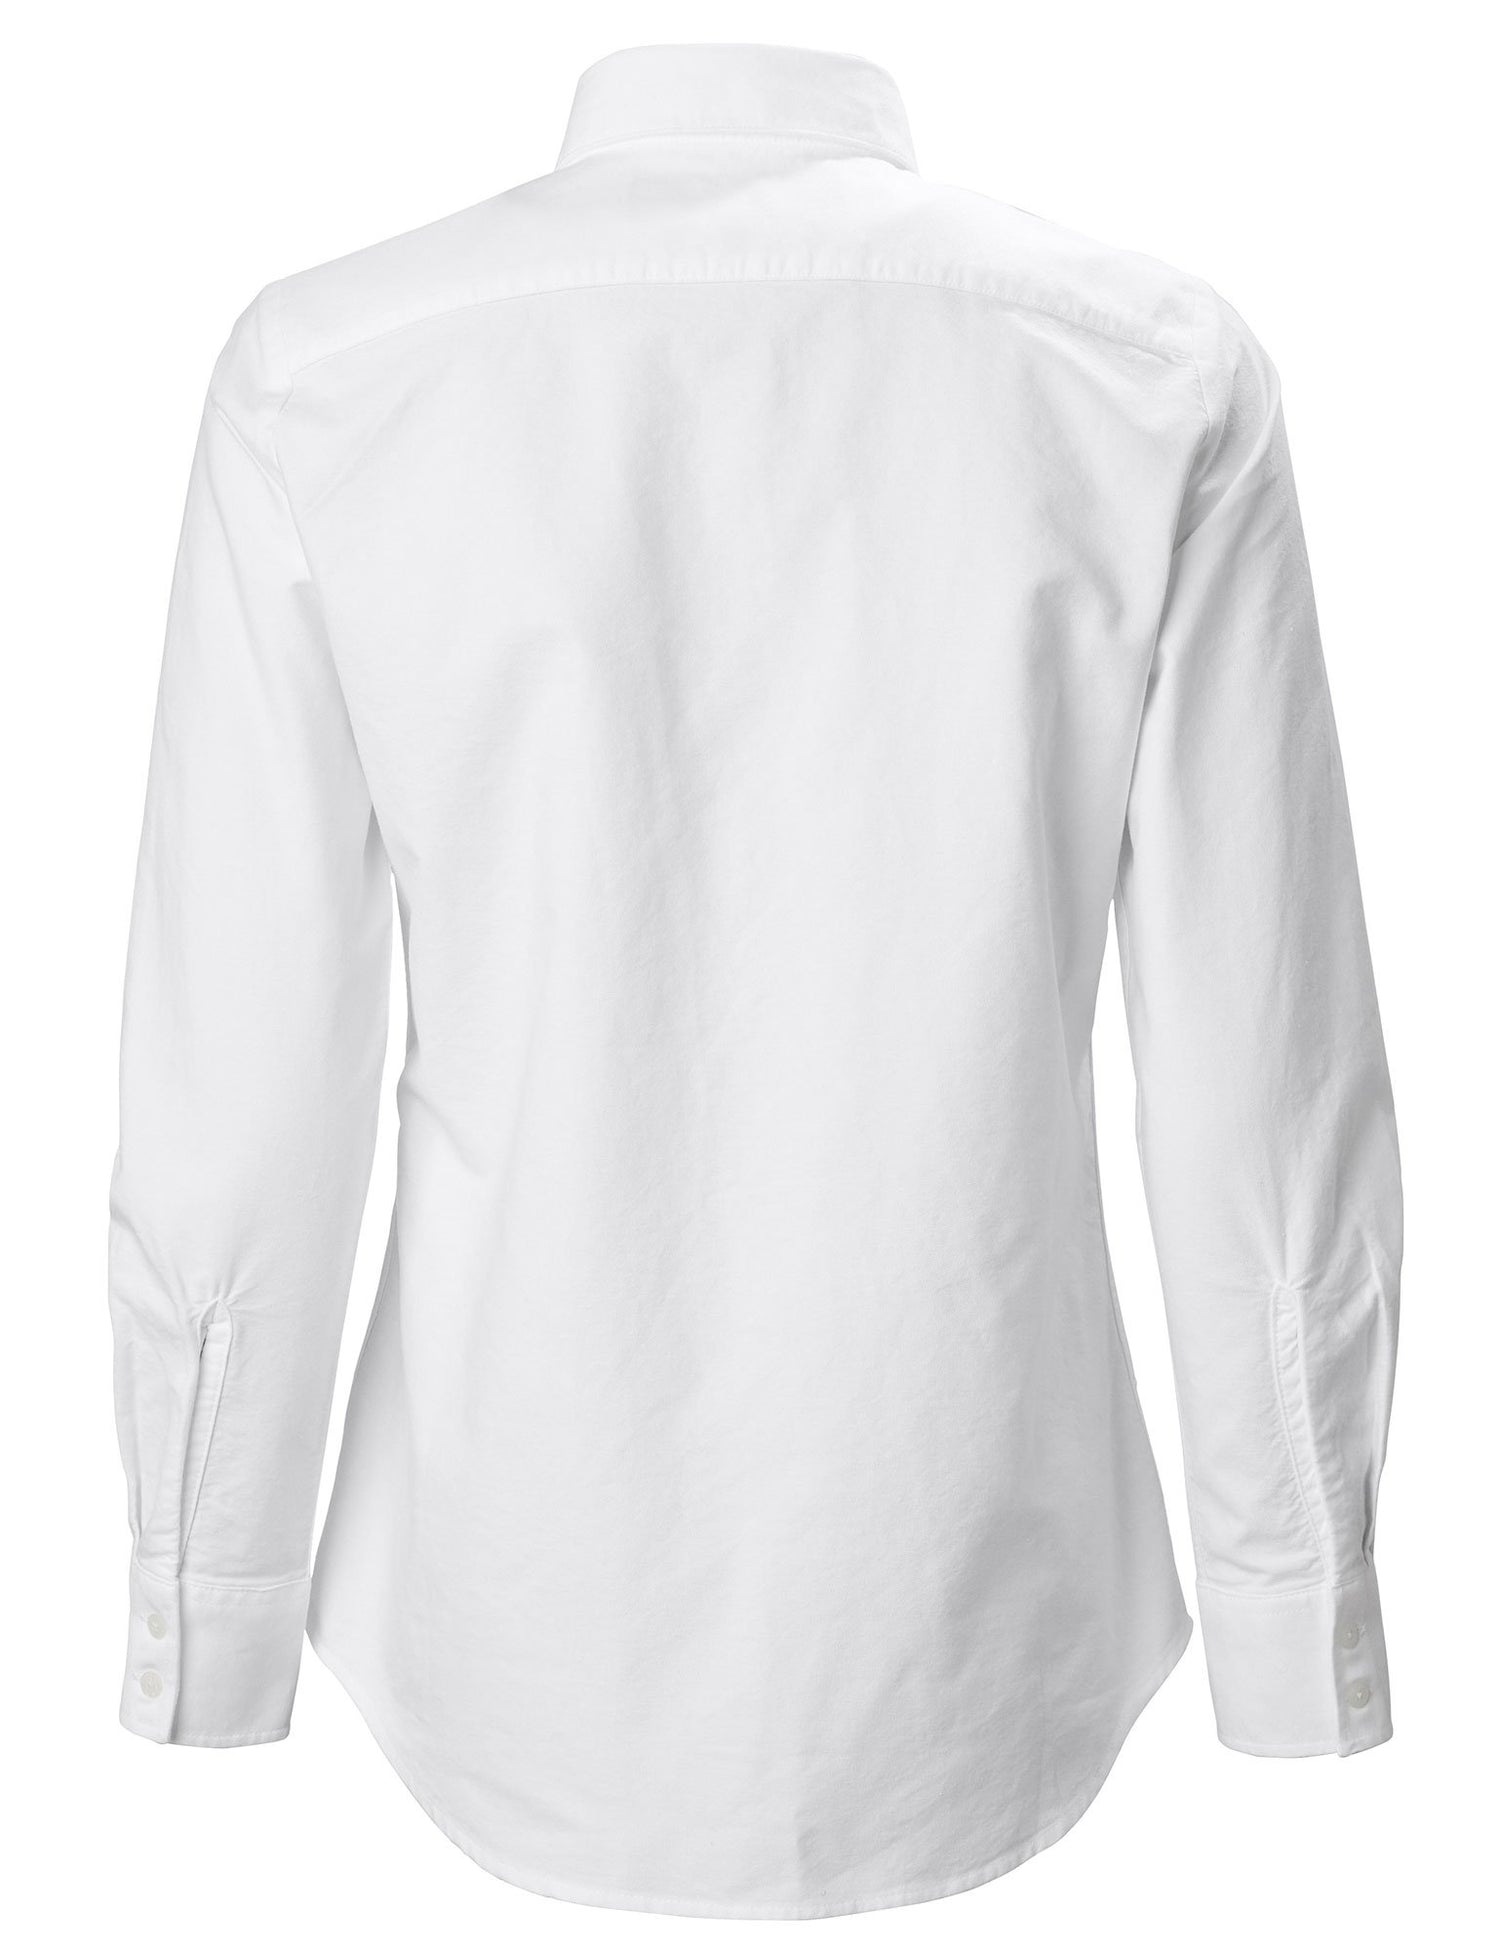 Back View Ladies Oxford Cotton Shirt by Musto